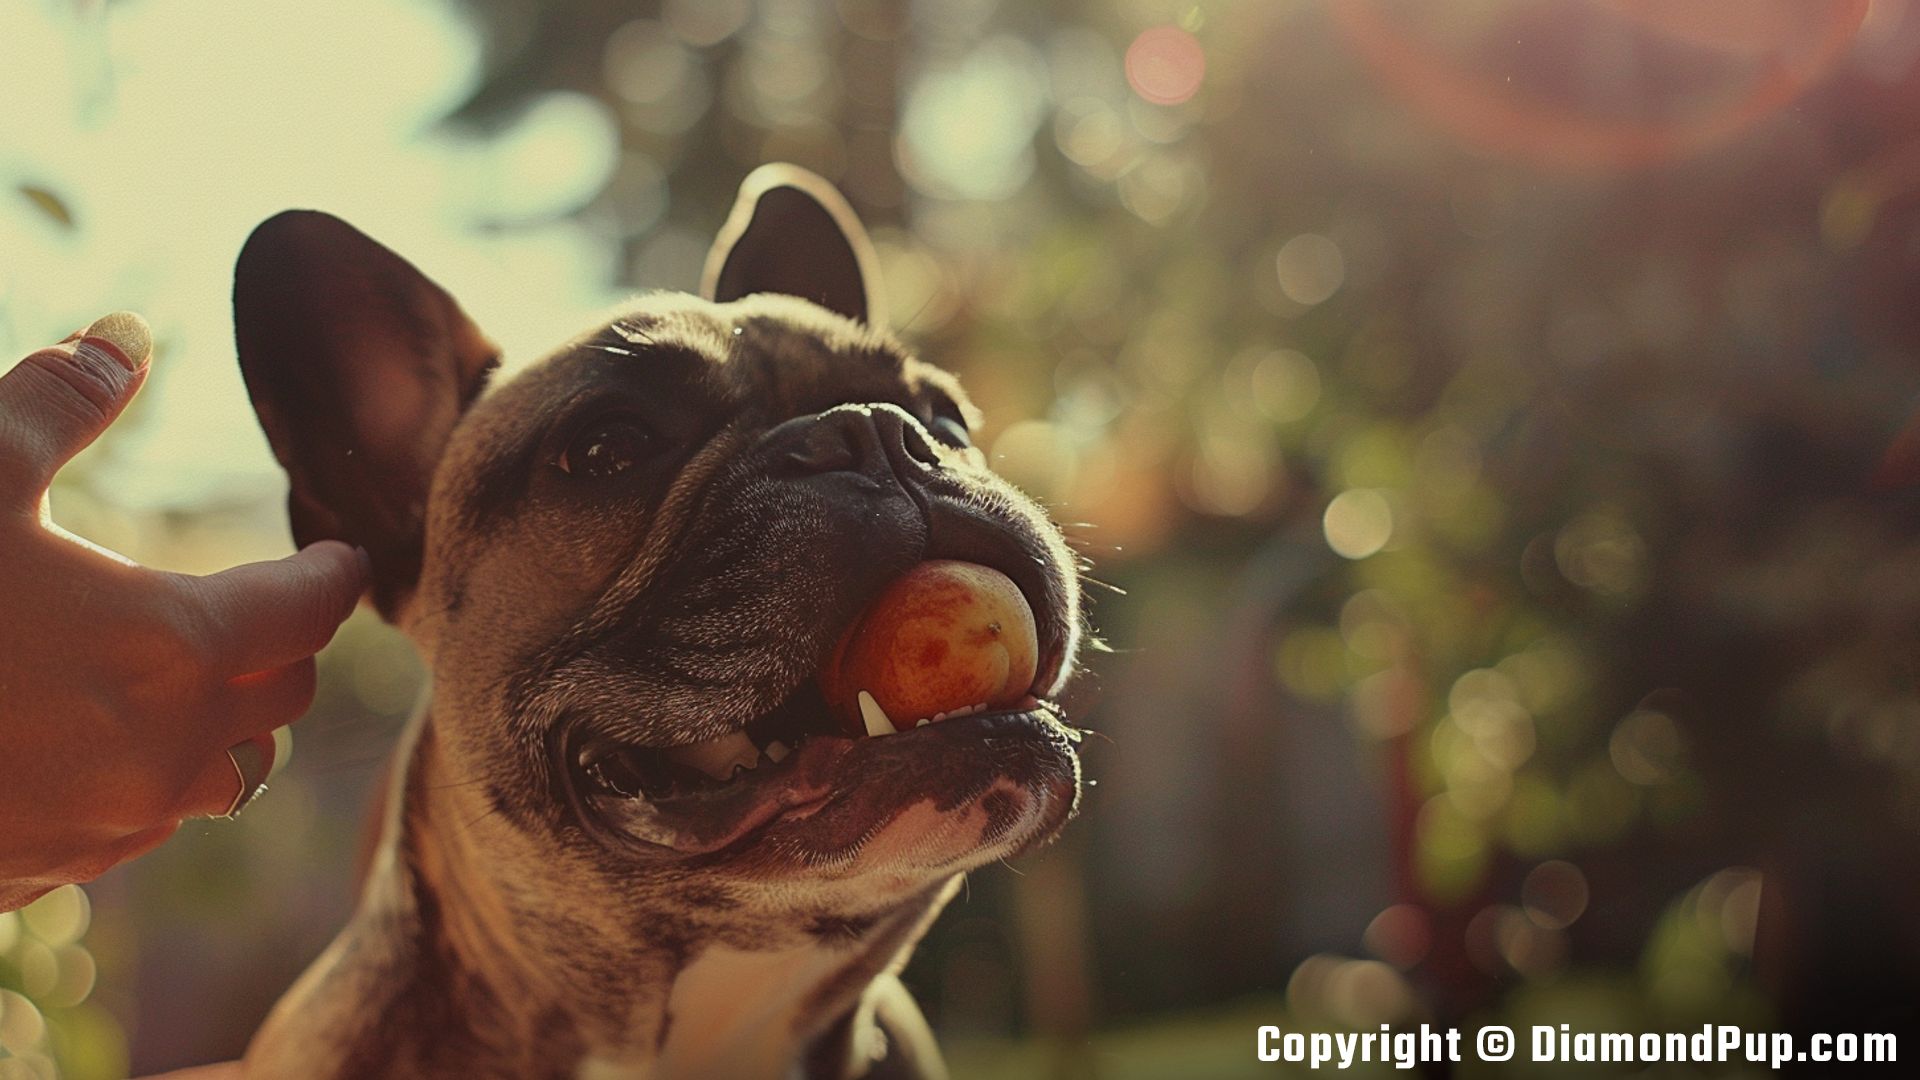 Image of a Cute French Bulldog Eating Peaches